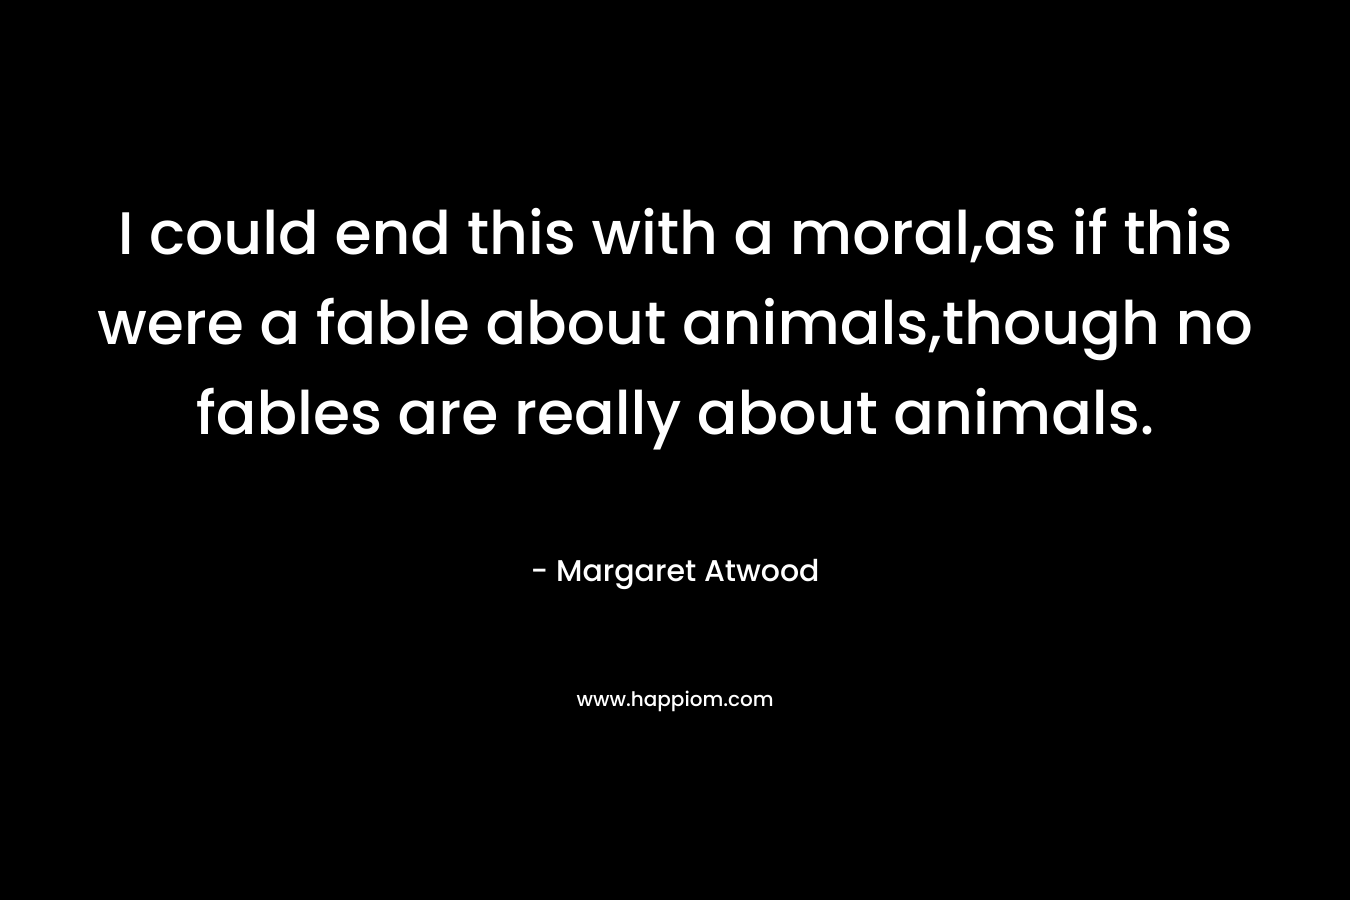 I could end this with a moral,as if this were a fable about animals,though no fables are really about animals.